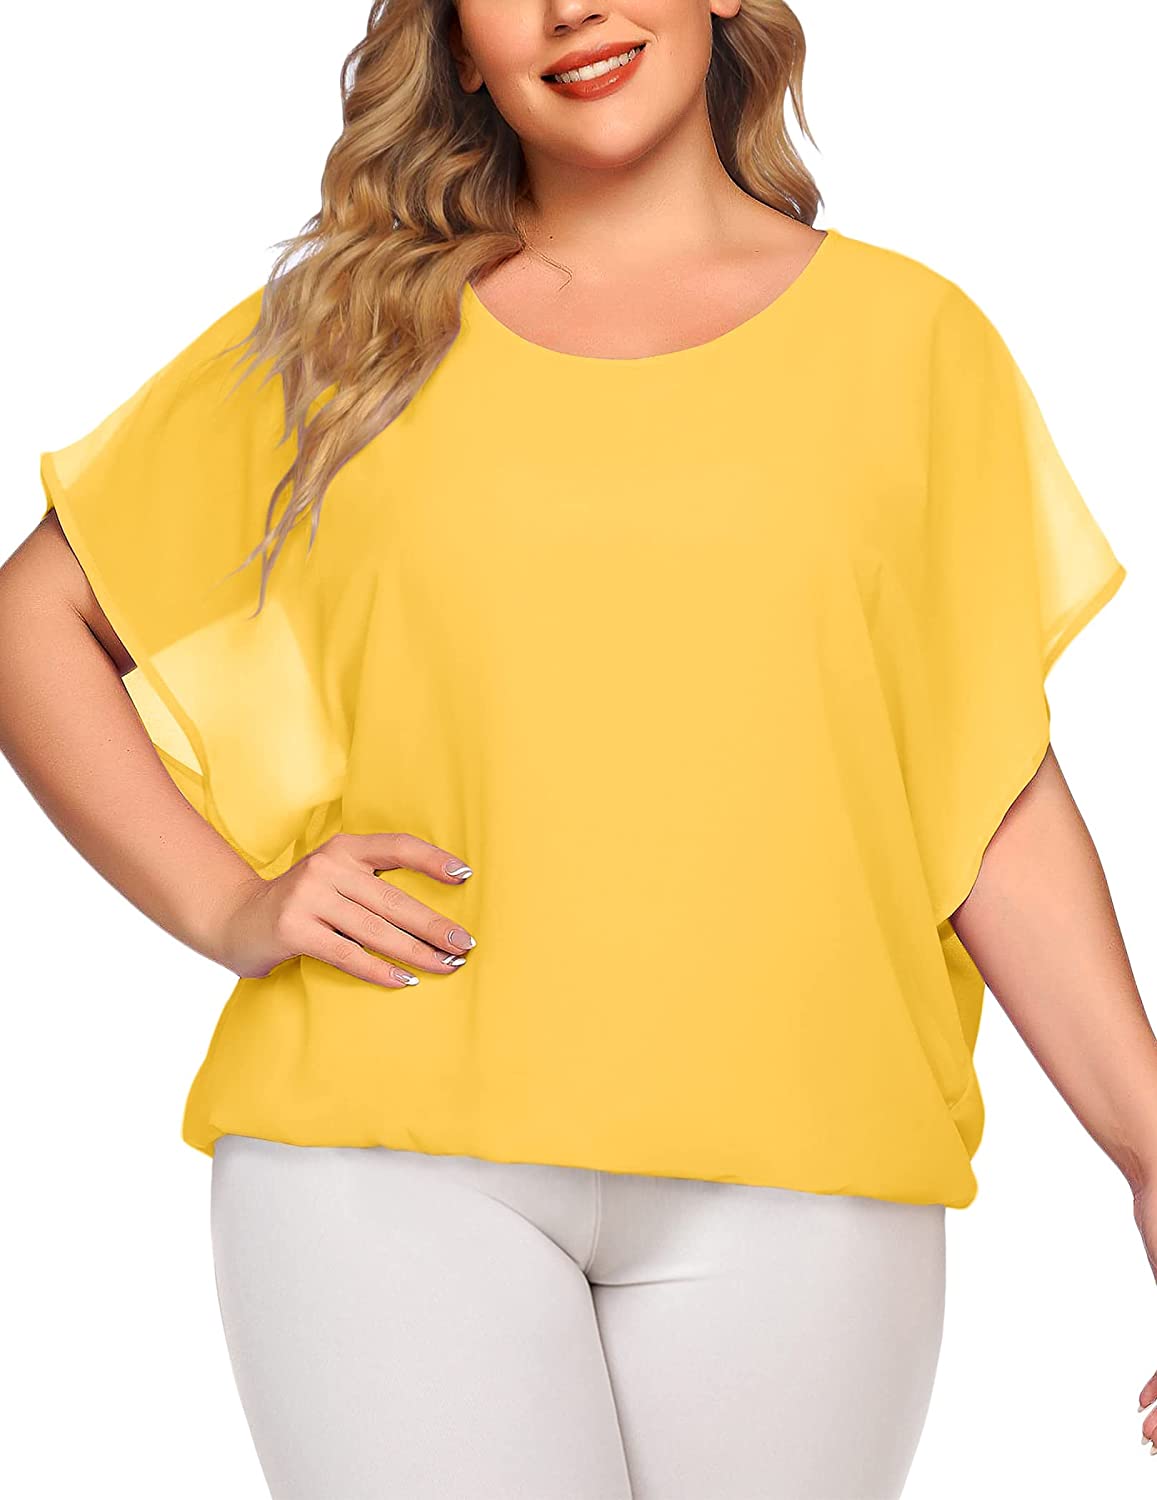 IN'VOLAND Plus Size Women Chiffon Blouse Batwing Sleeve Tops Scoop